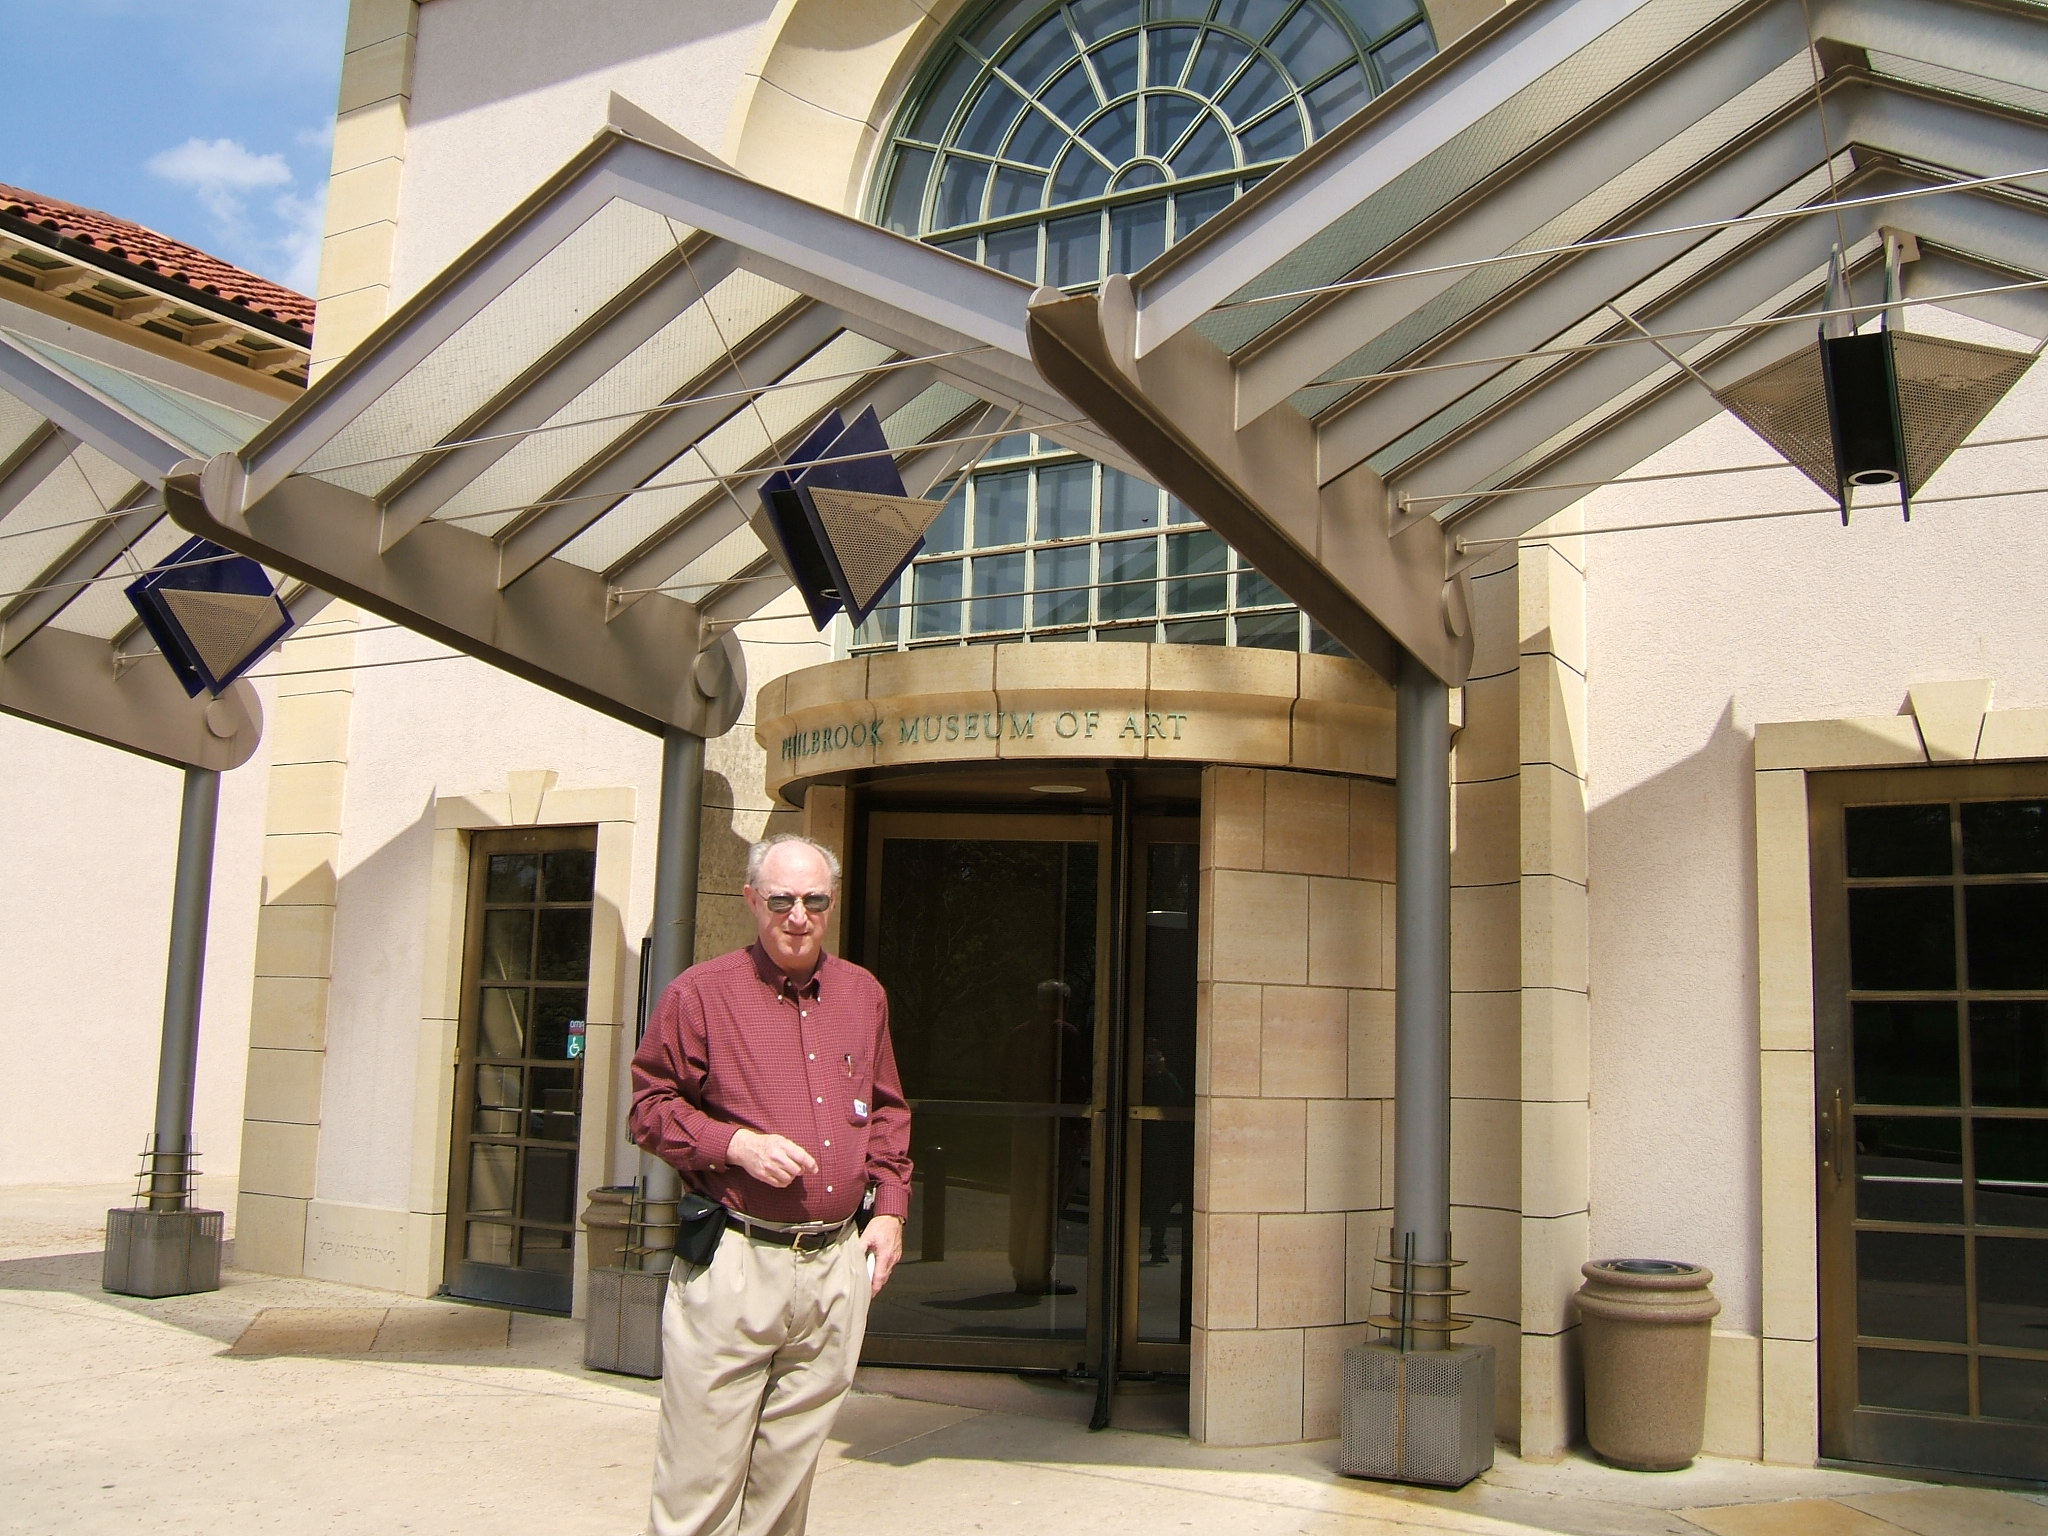 Don at Philbrook Art Museum entrance